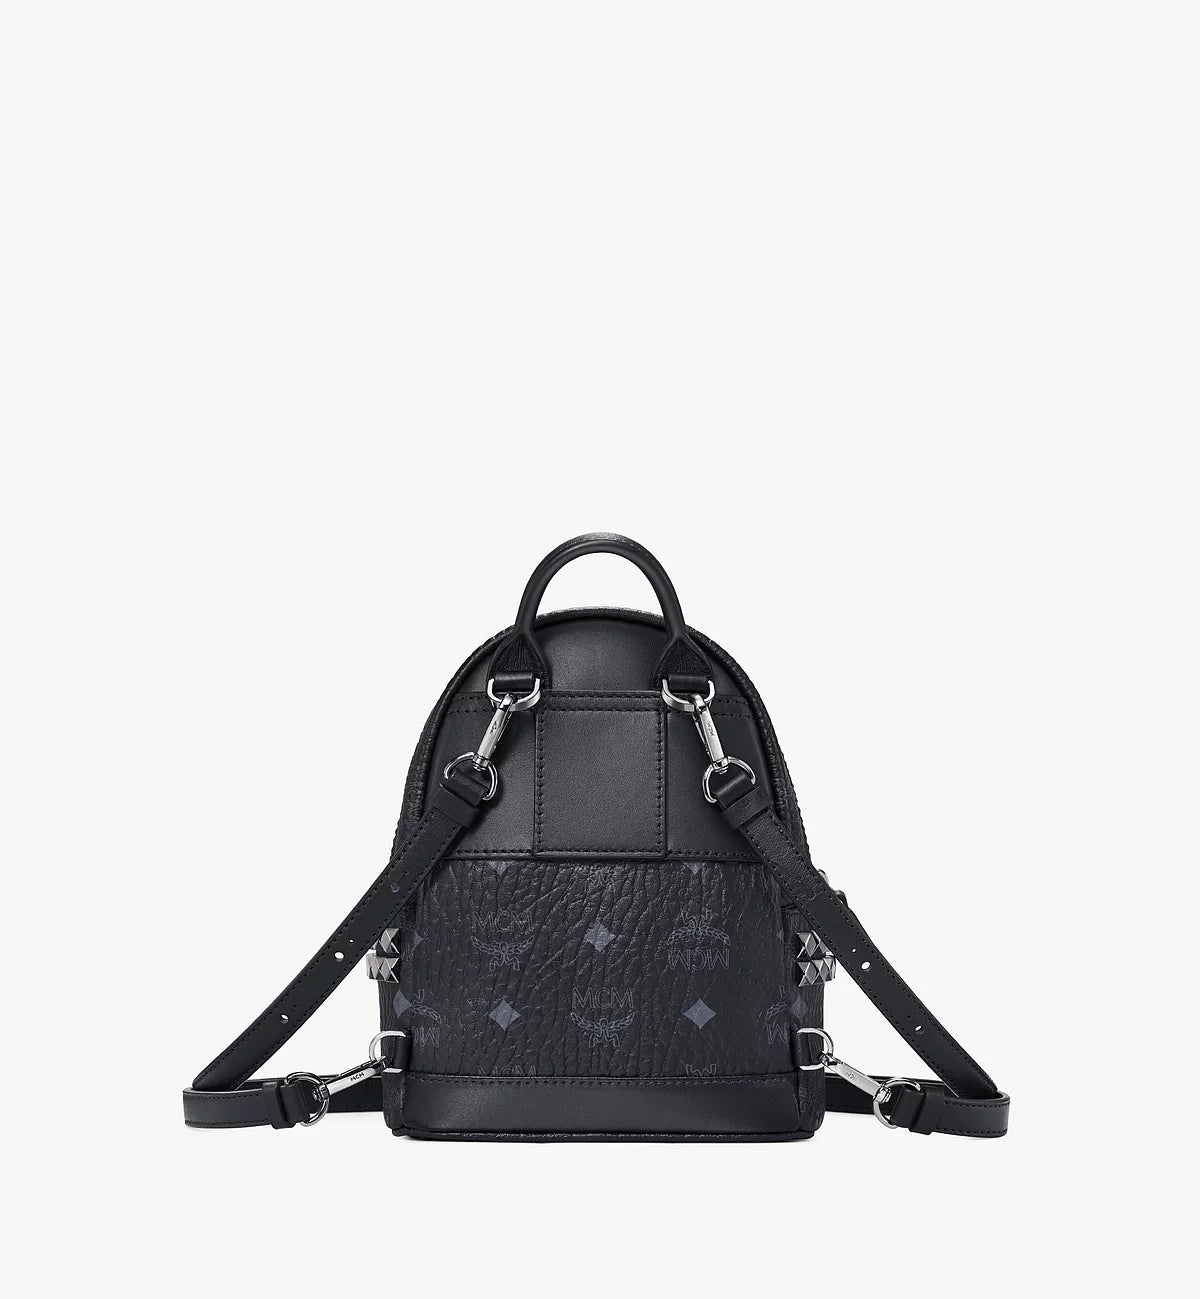 Designer Mini Tiny Backpack With Flower Purse Luxury Phone Bag For Women  And Girls By HH By The Pool From Mj123456, $53.89 | DHgate.Com